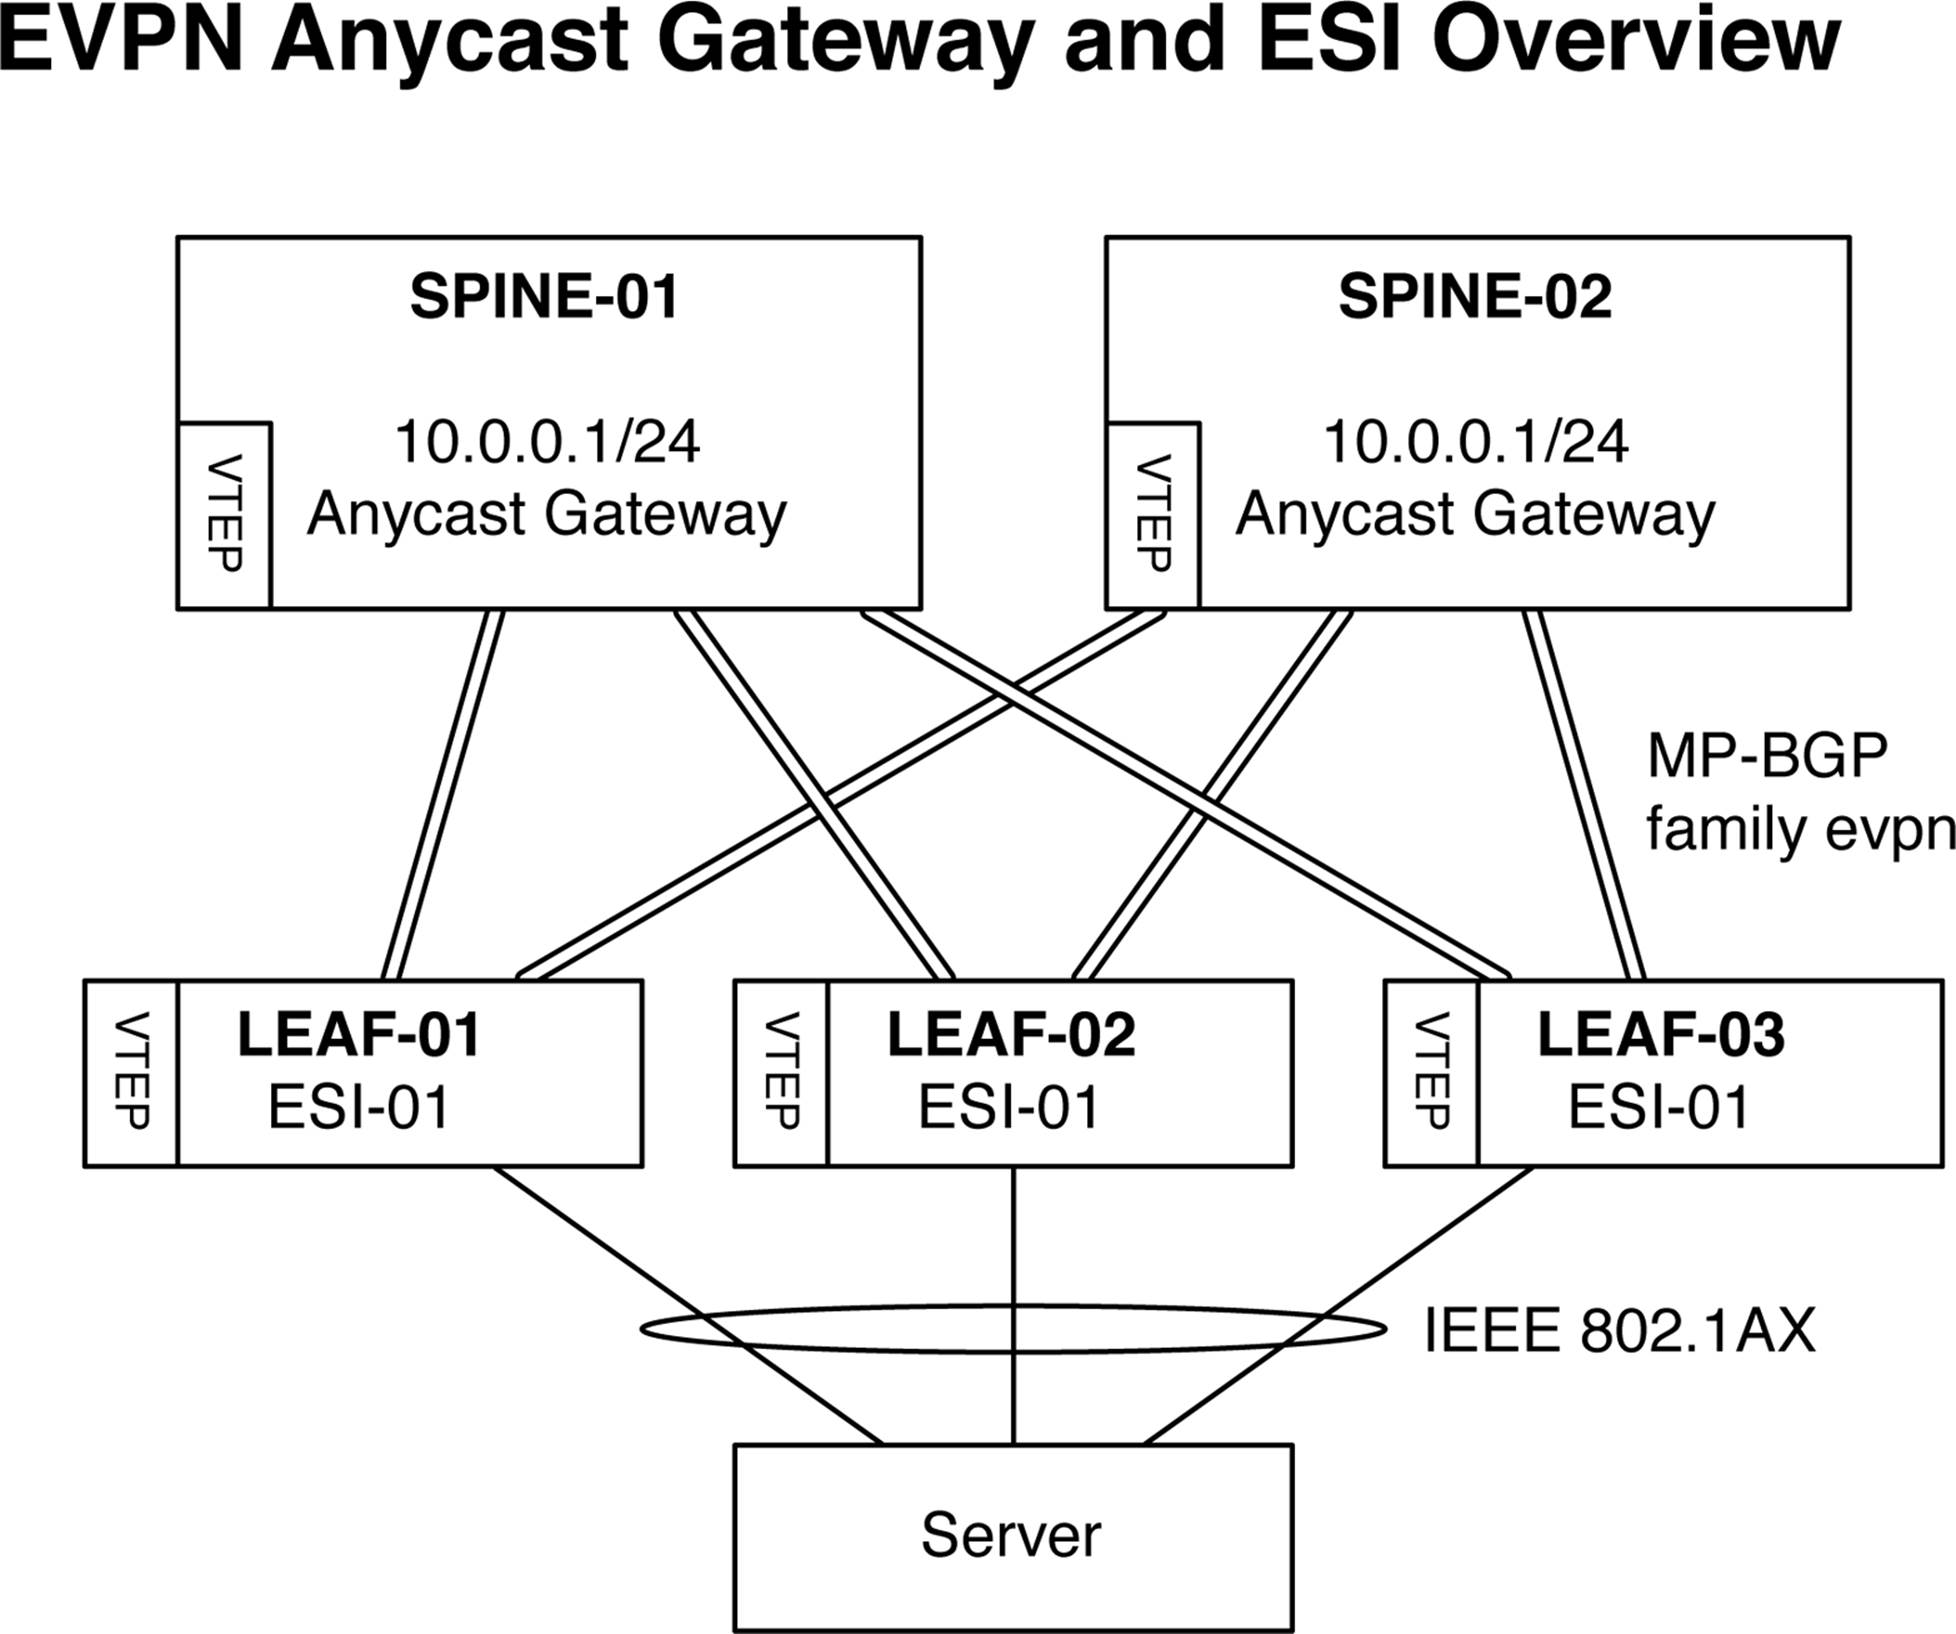 Illustration of EVPN Anycast gateway and ESI overview